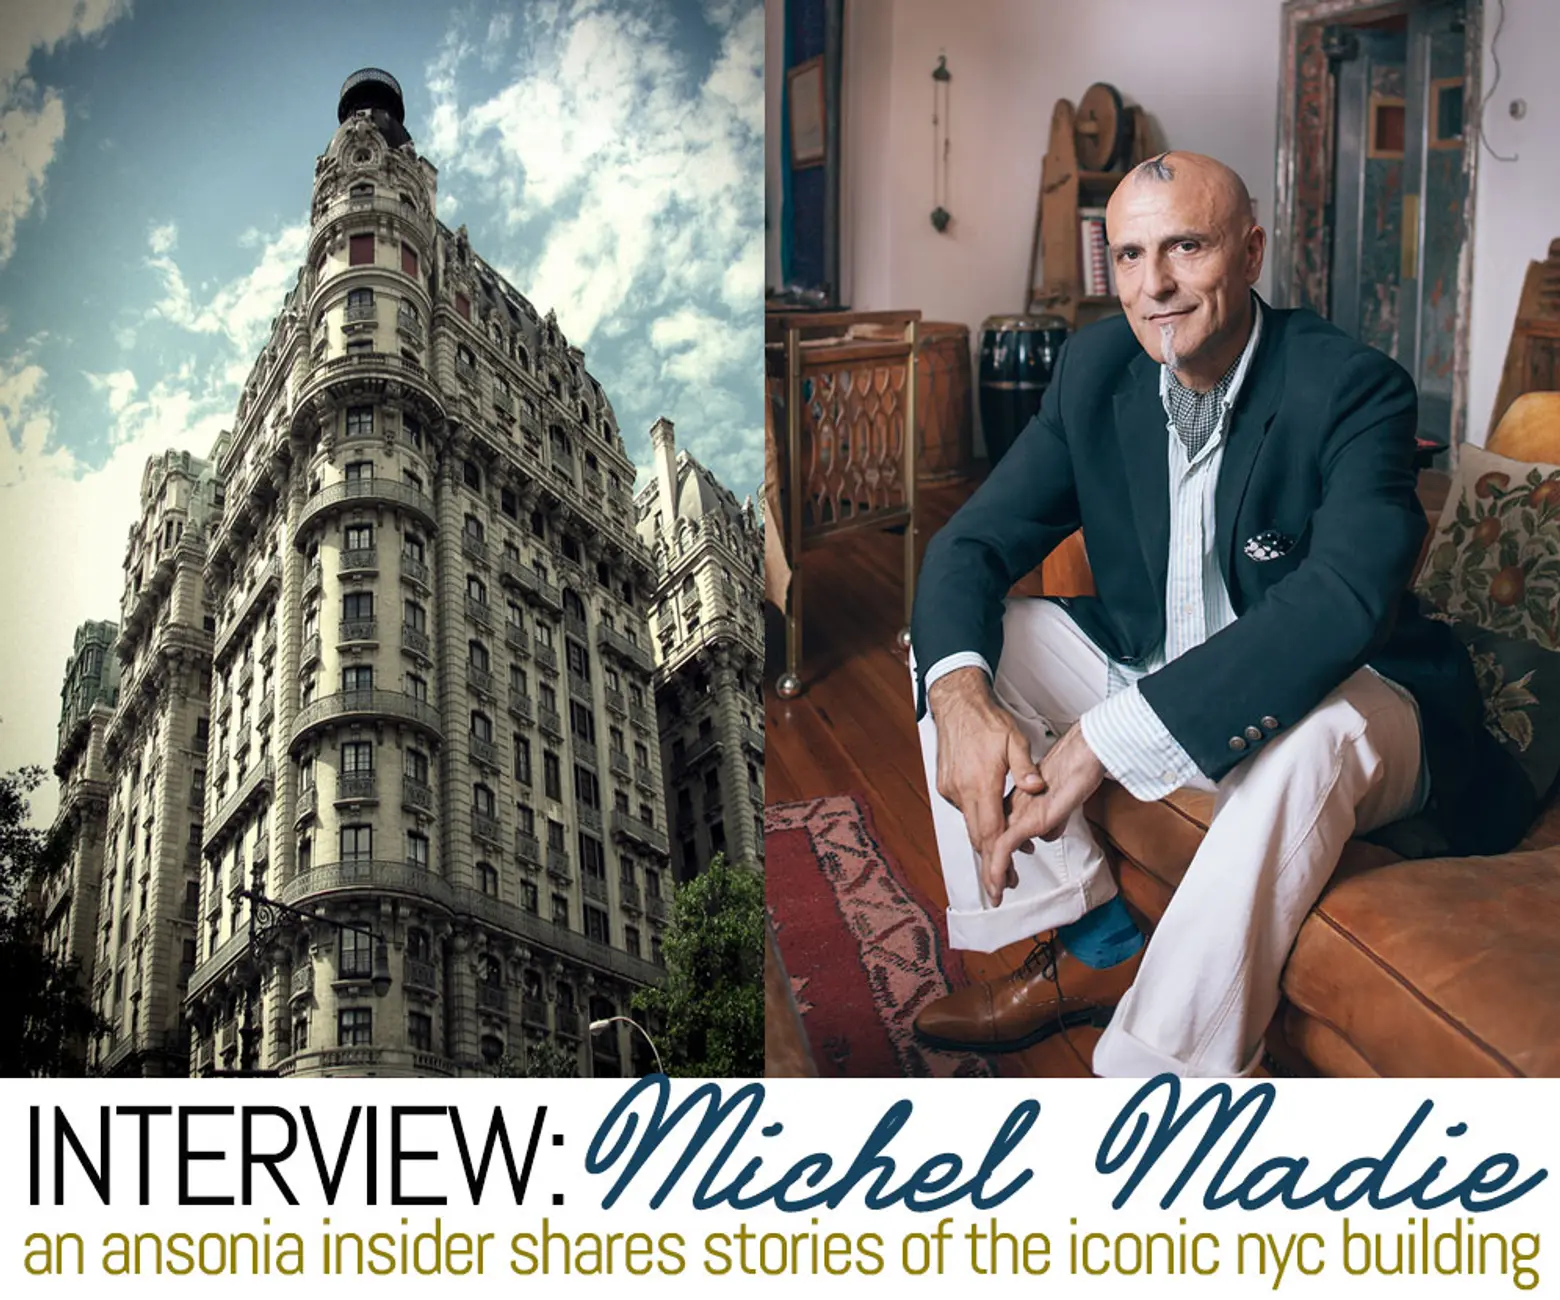 Interview: Ansonia Insider Michel Madie Shares Stories of the Iconic NYC Building